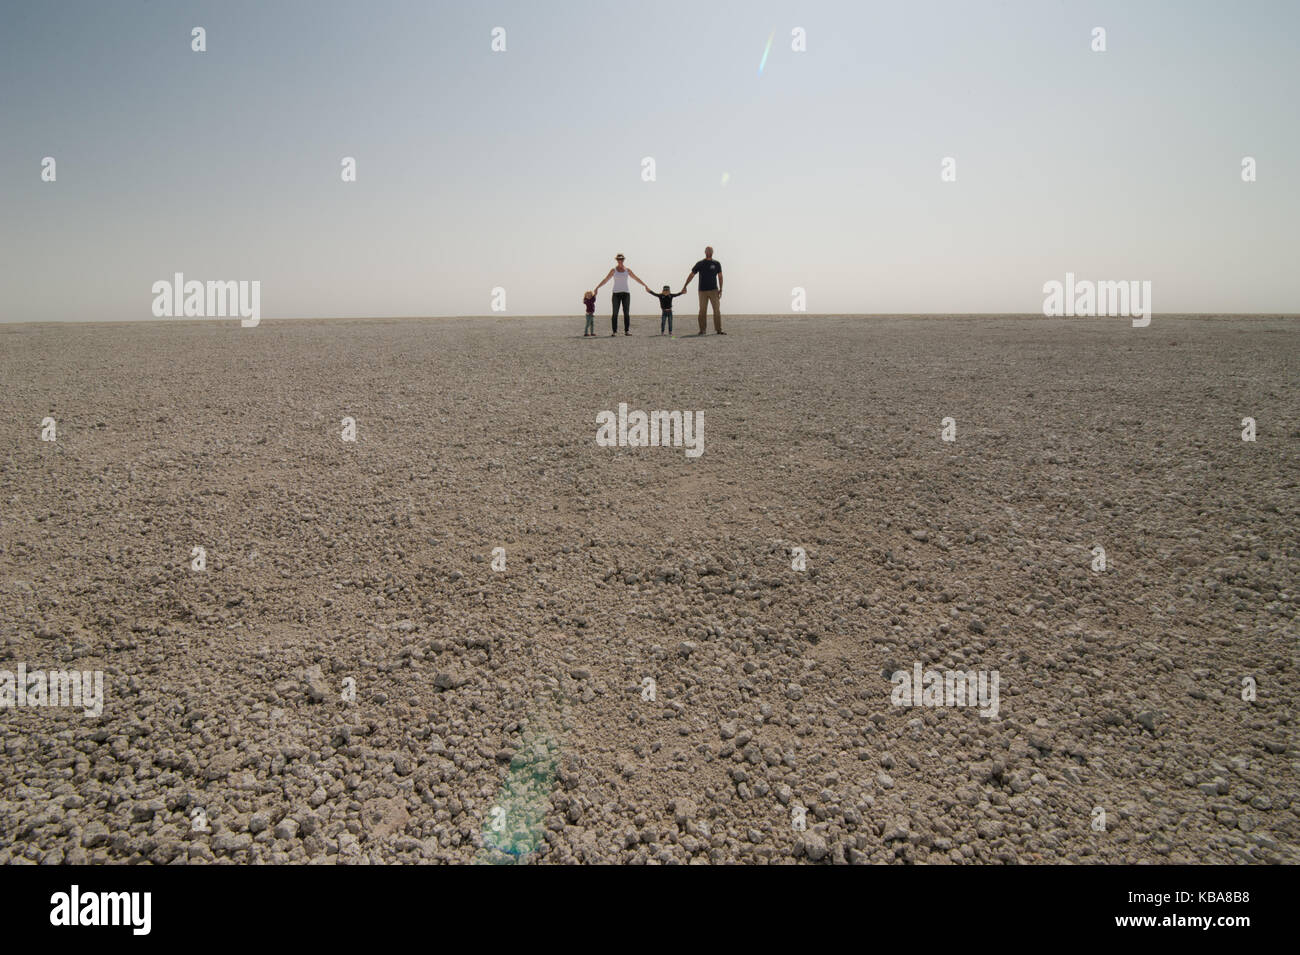 A family provides perspective for the size of the salt pan, Etosha National Park, Namibia Stock Photo